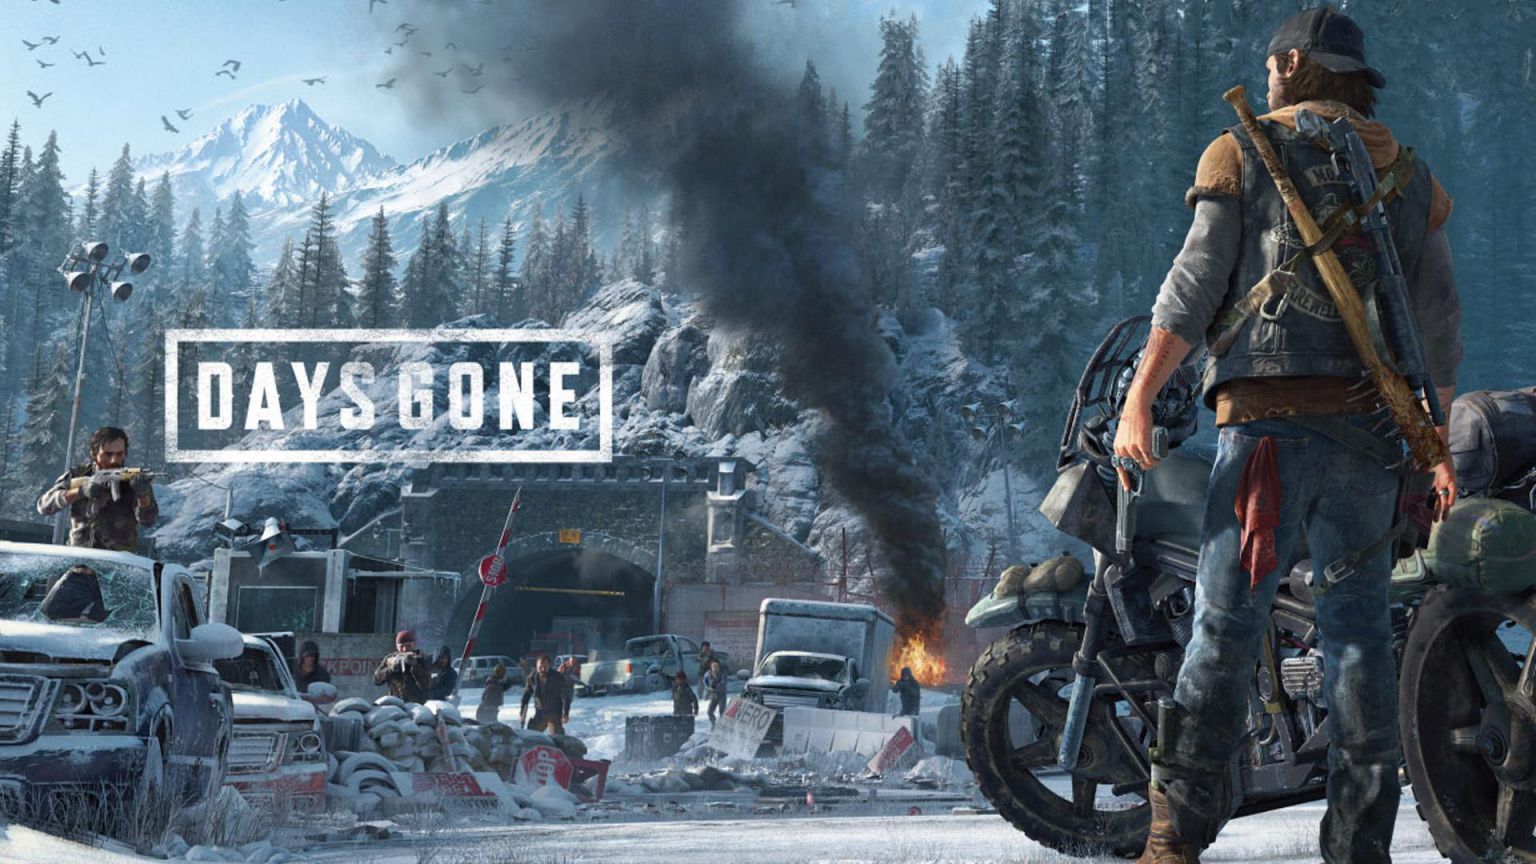 Days gone pc review